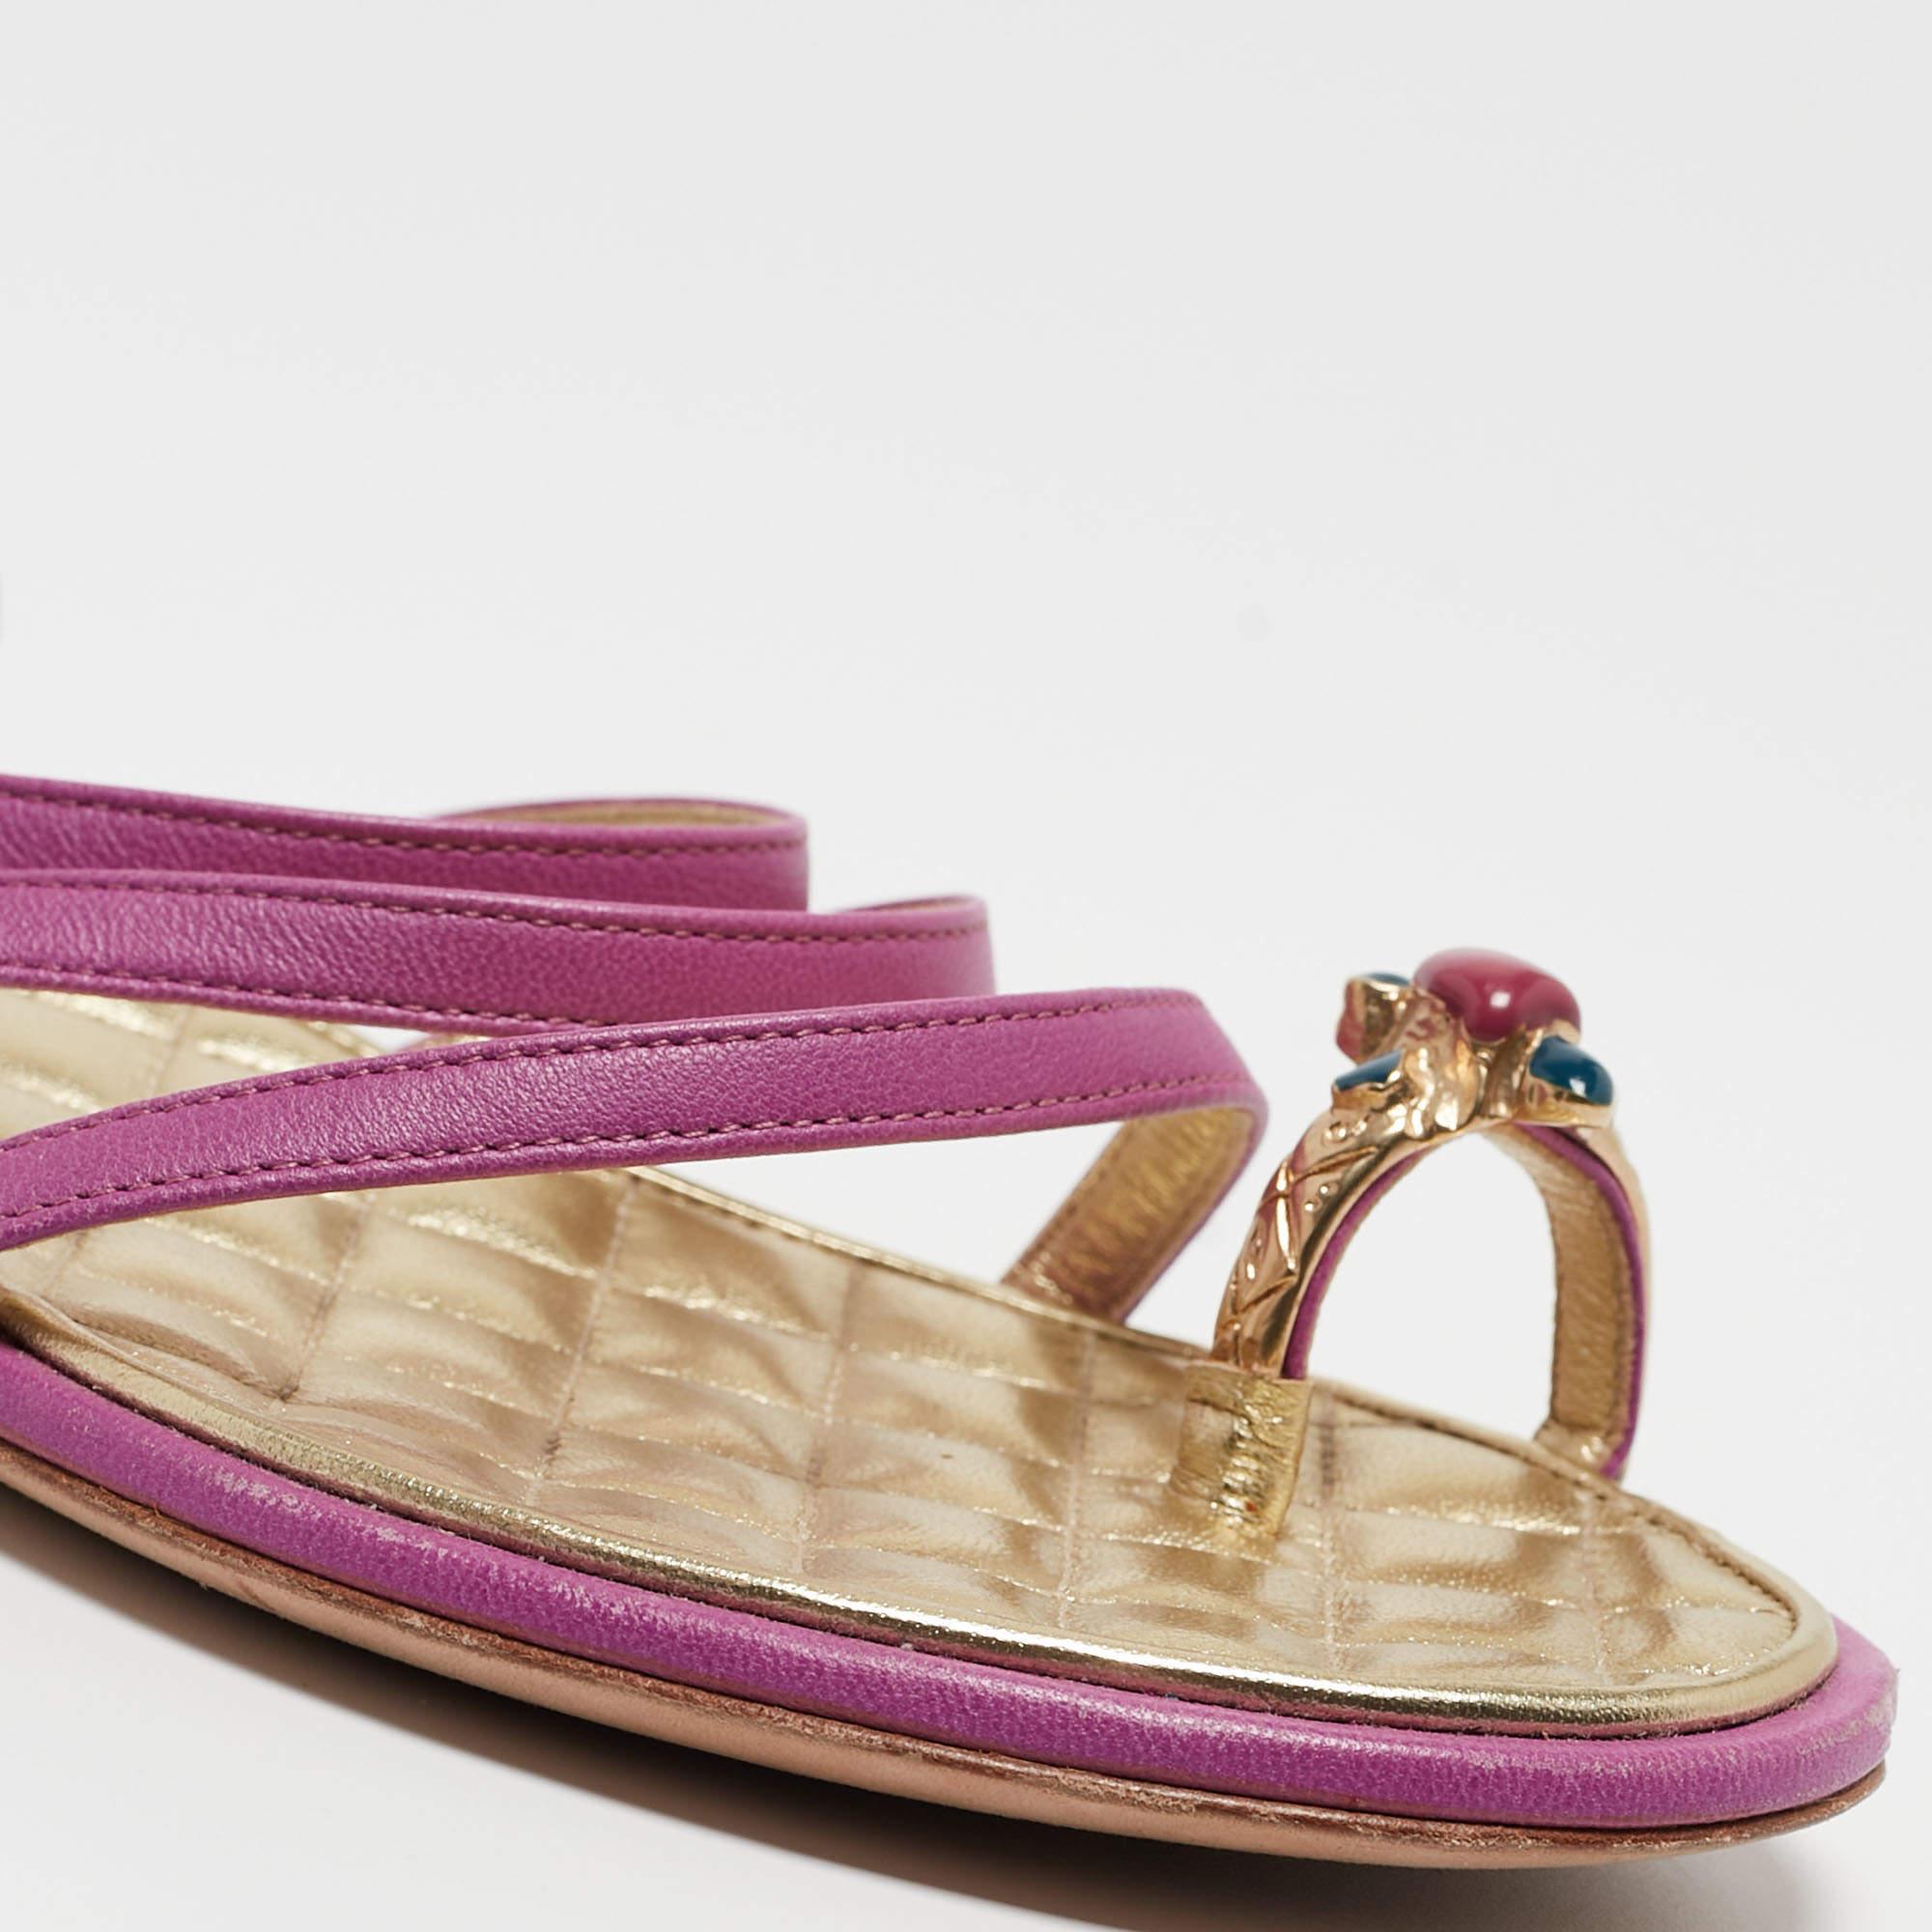 Chanel Purple Leather Embellished Toe Ring Ankle Strap Flat Sandals Size 36.5 2